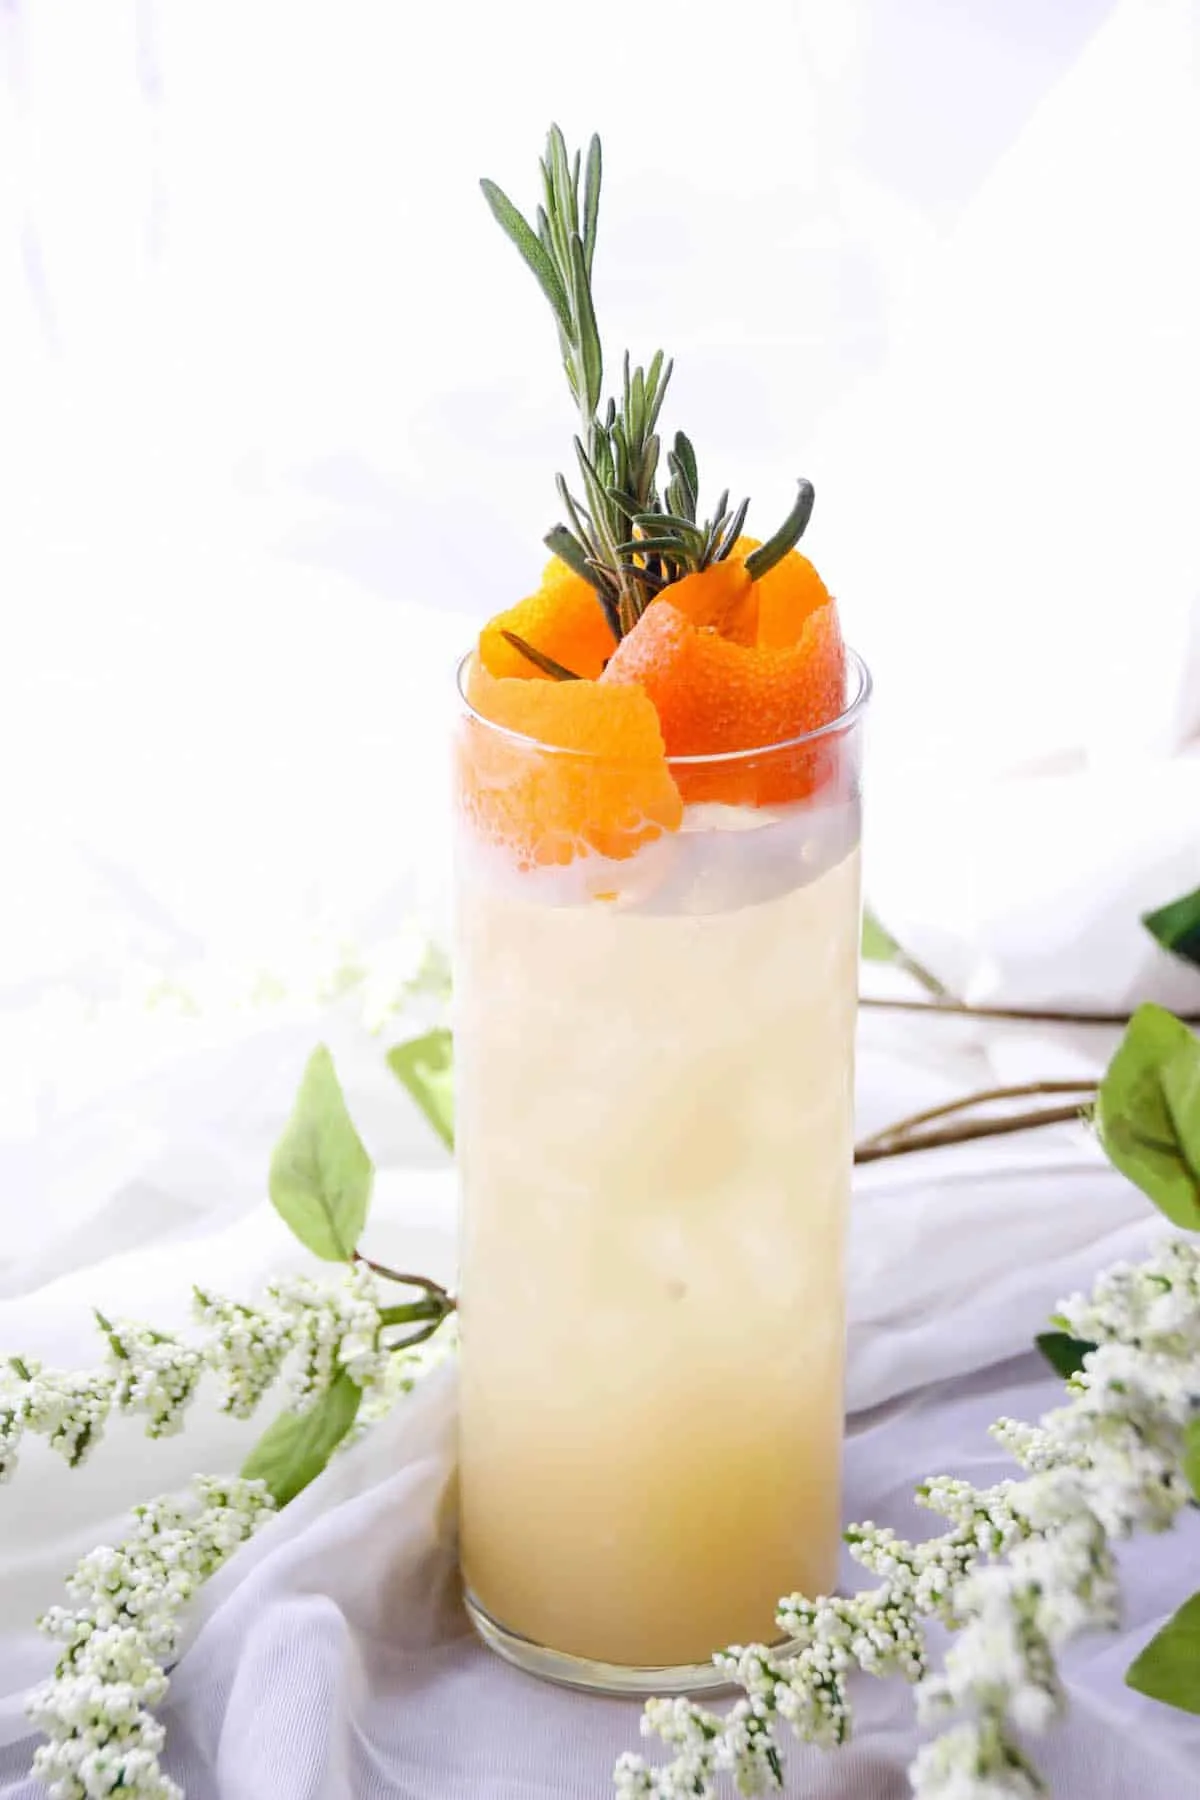 Coconut vodka drink recipe in a glass with orange rind